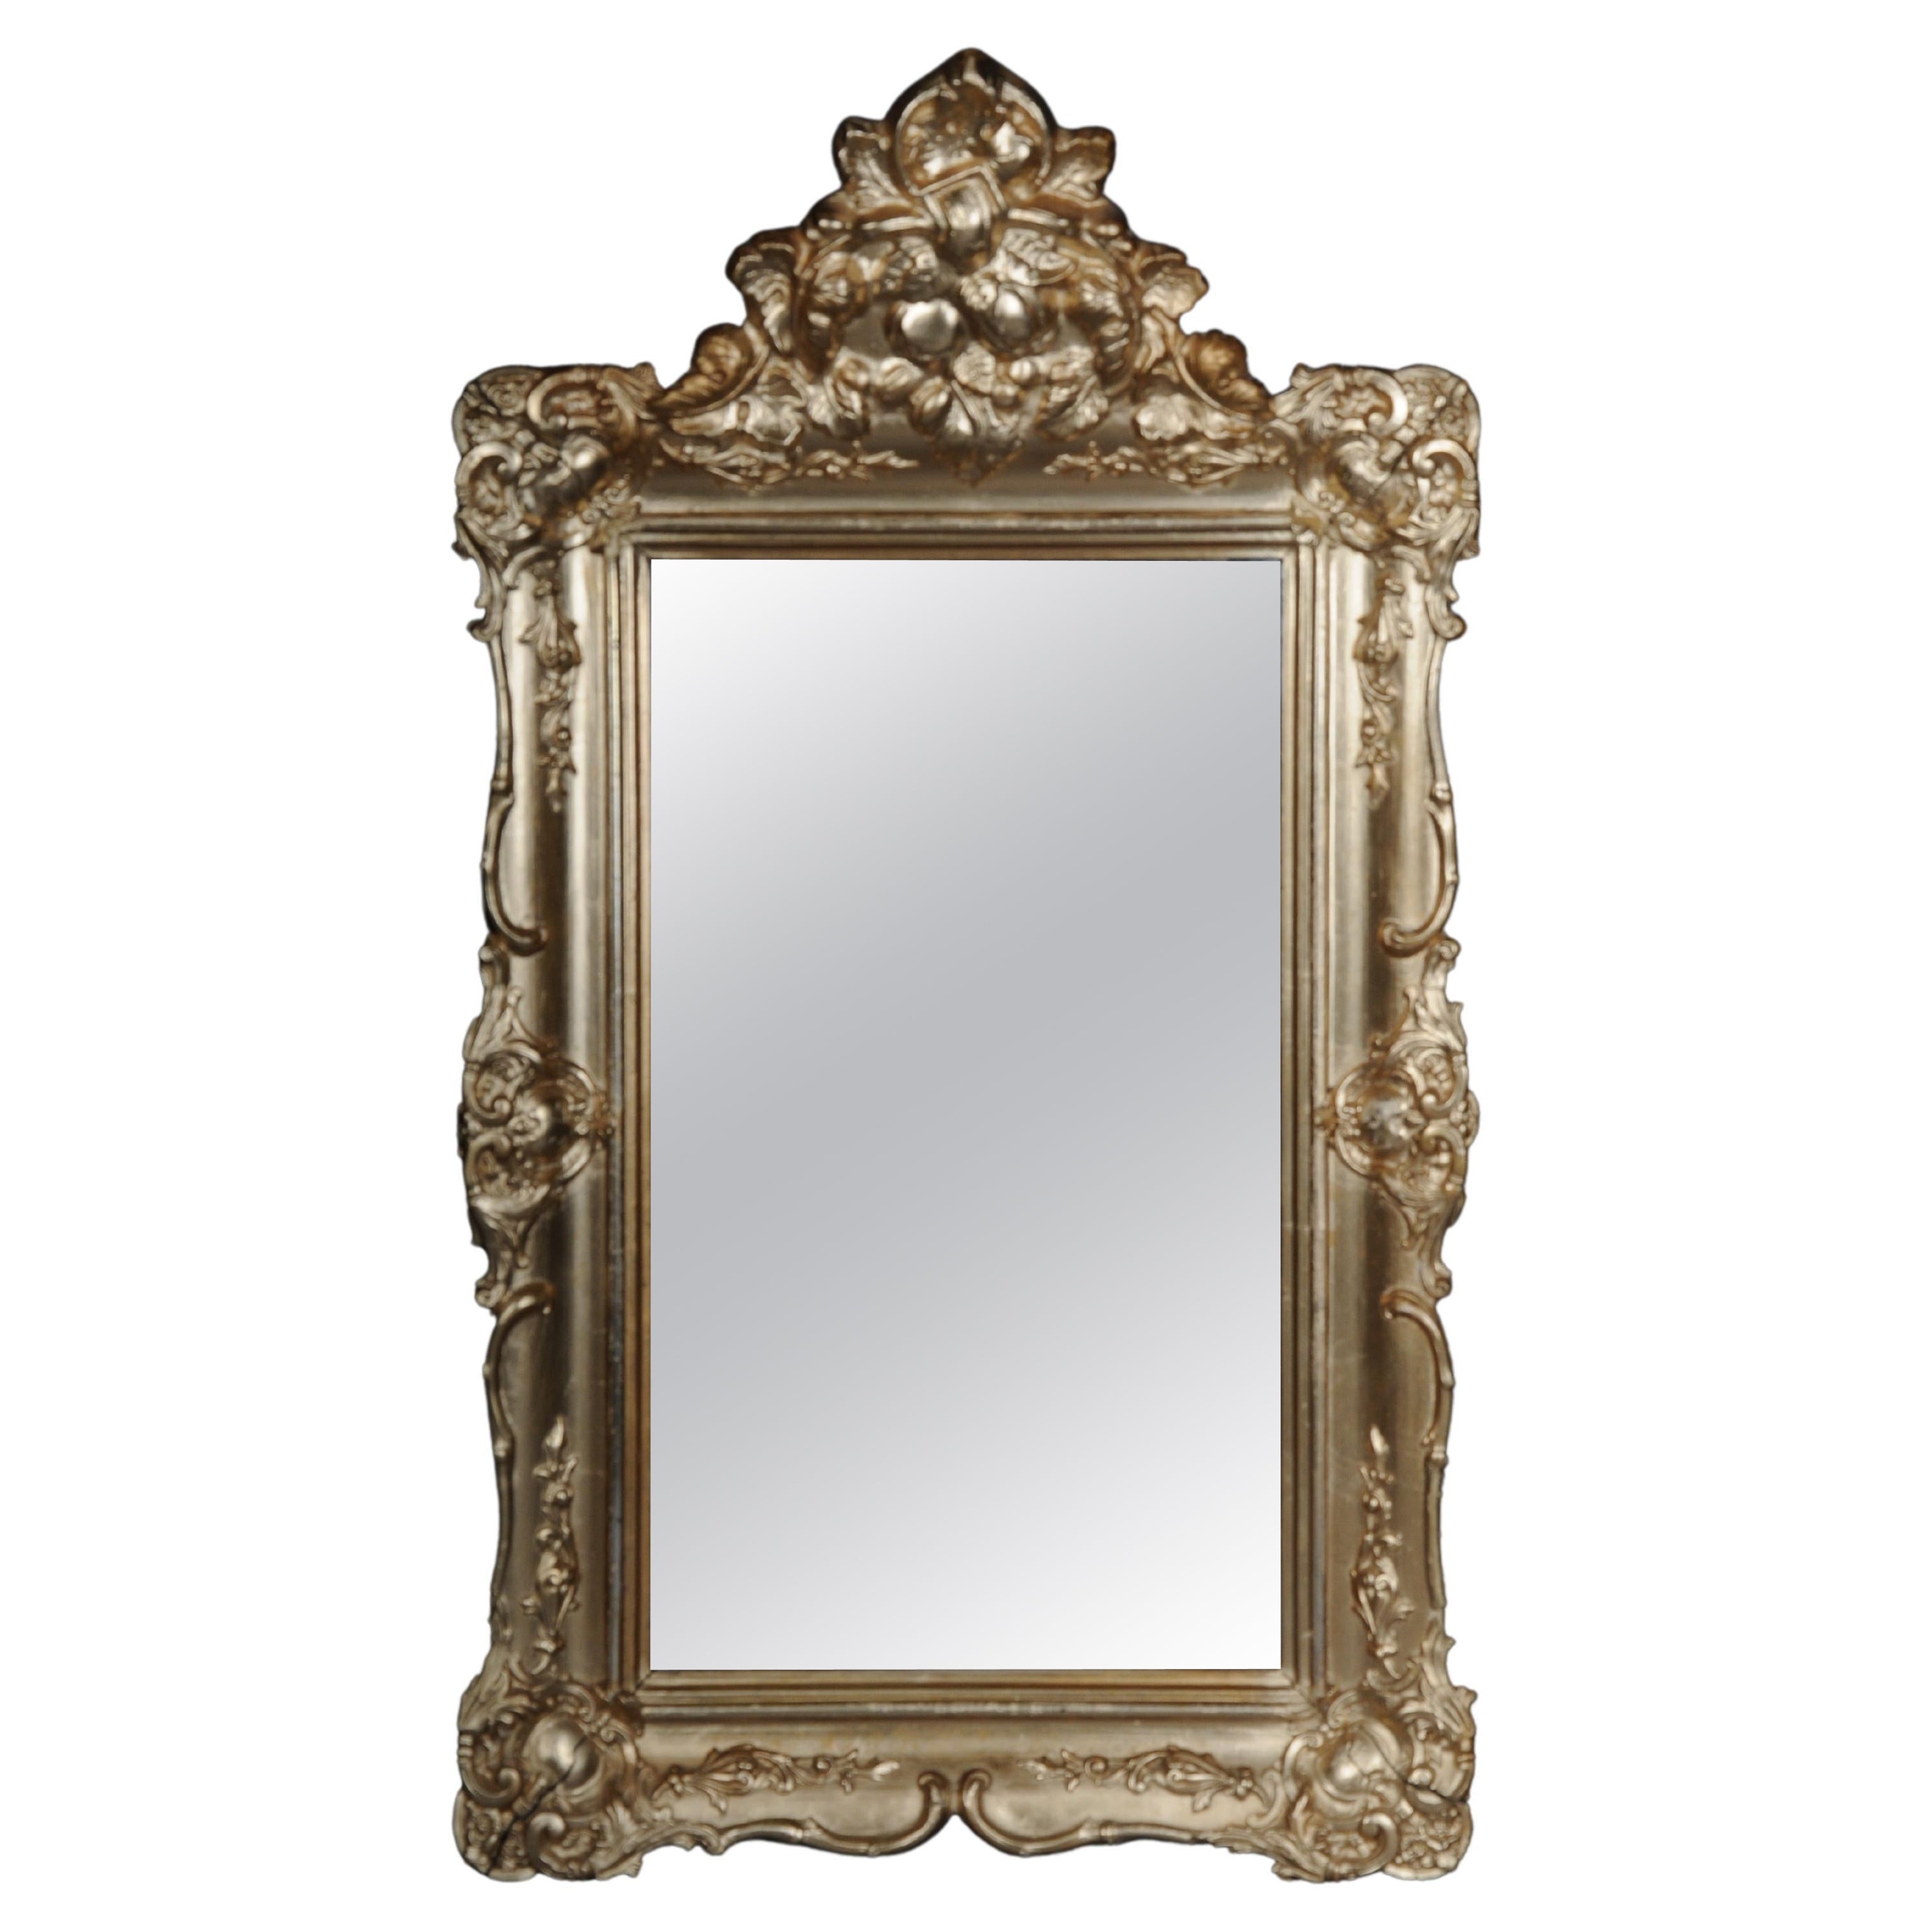 Antique gilded wall mirror, Germany around 1870